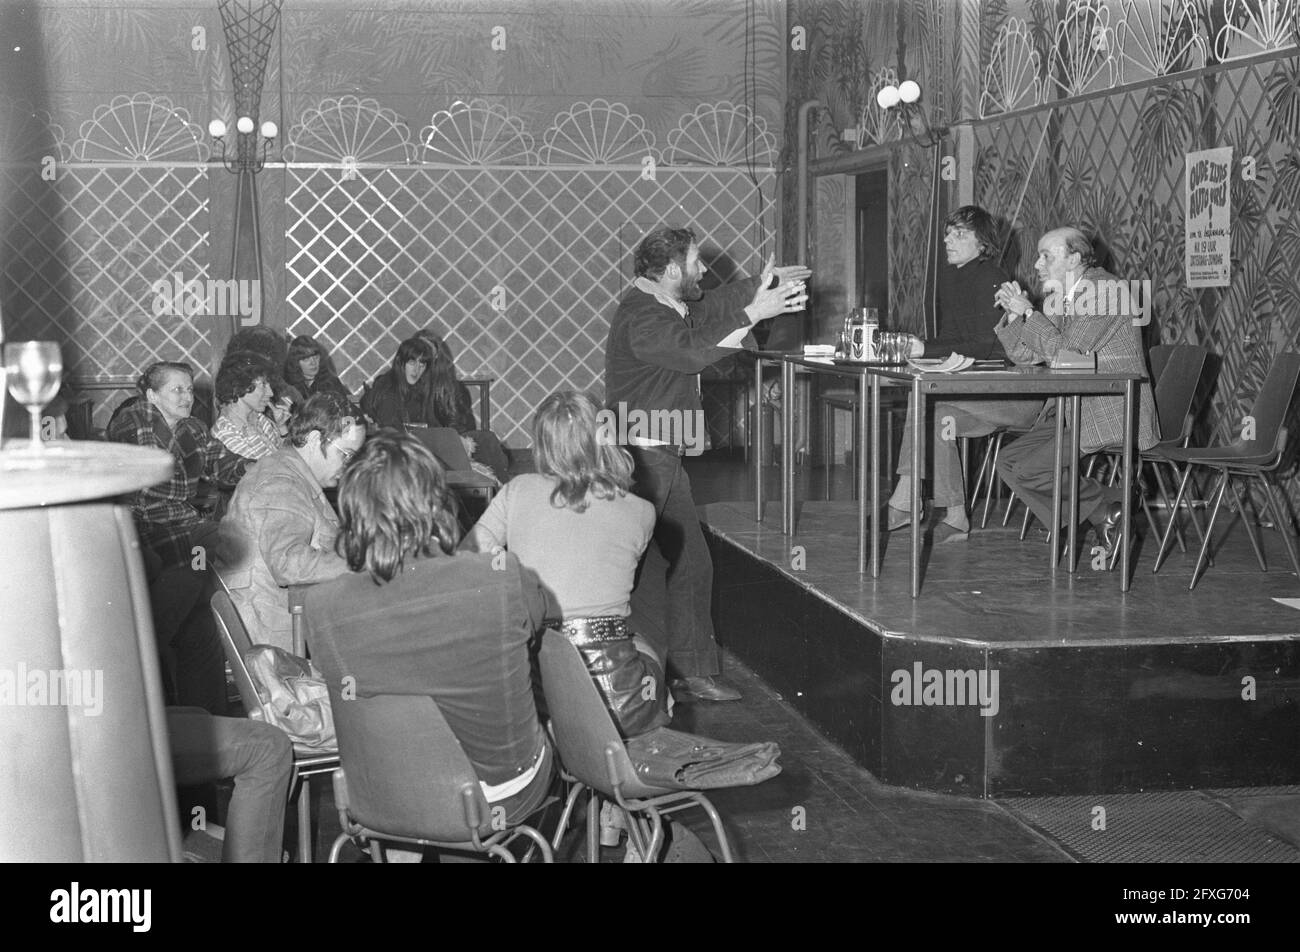 Meeting on Red Light District car-free in Brakkegrond in Amsterdam, April  6, 1972, Meetings, The Netherlands, 20th century press agency photo, news  to remember, documentary, historic photography 1945-1990, visual stories,  human history